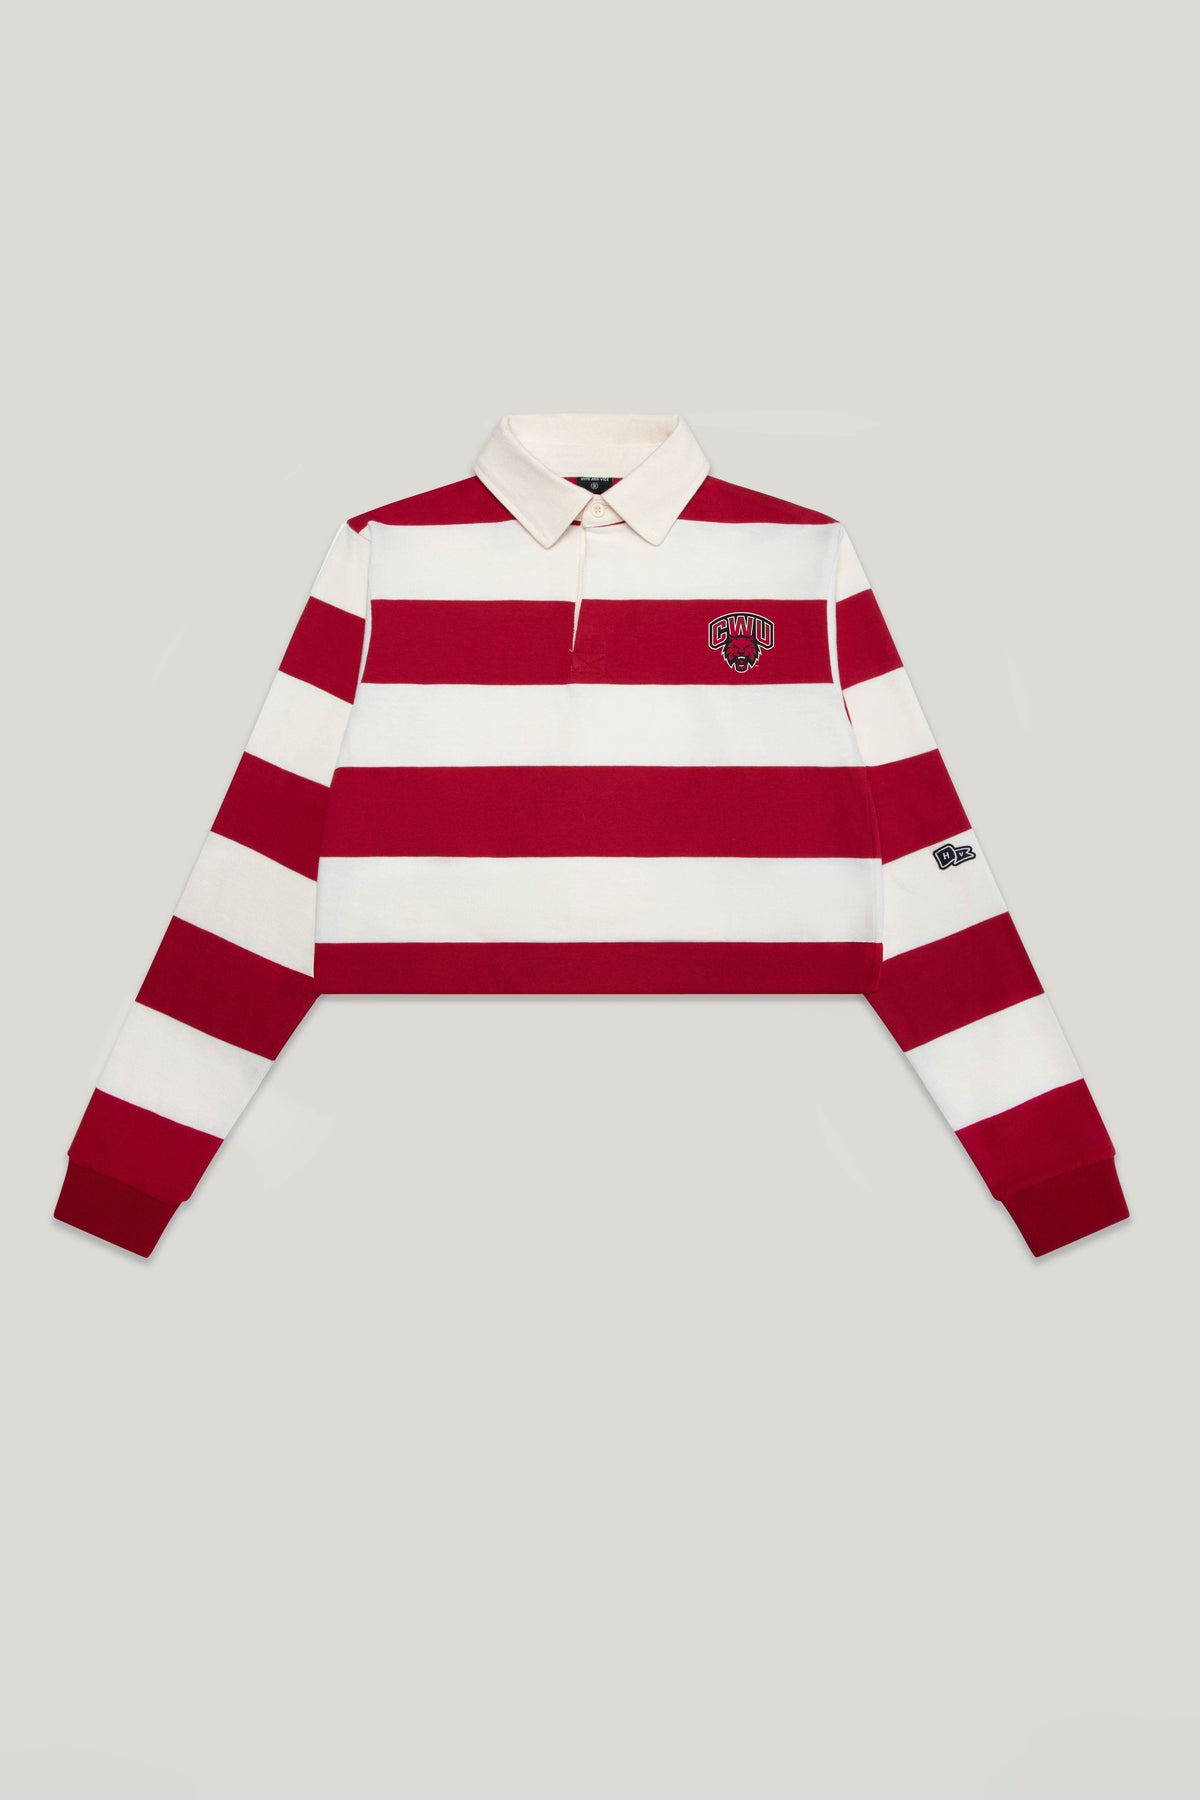 Central Washington University Rugby Top